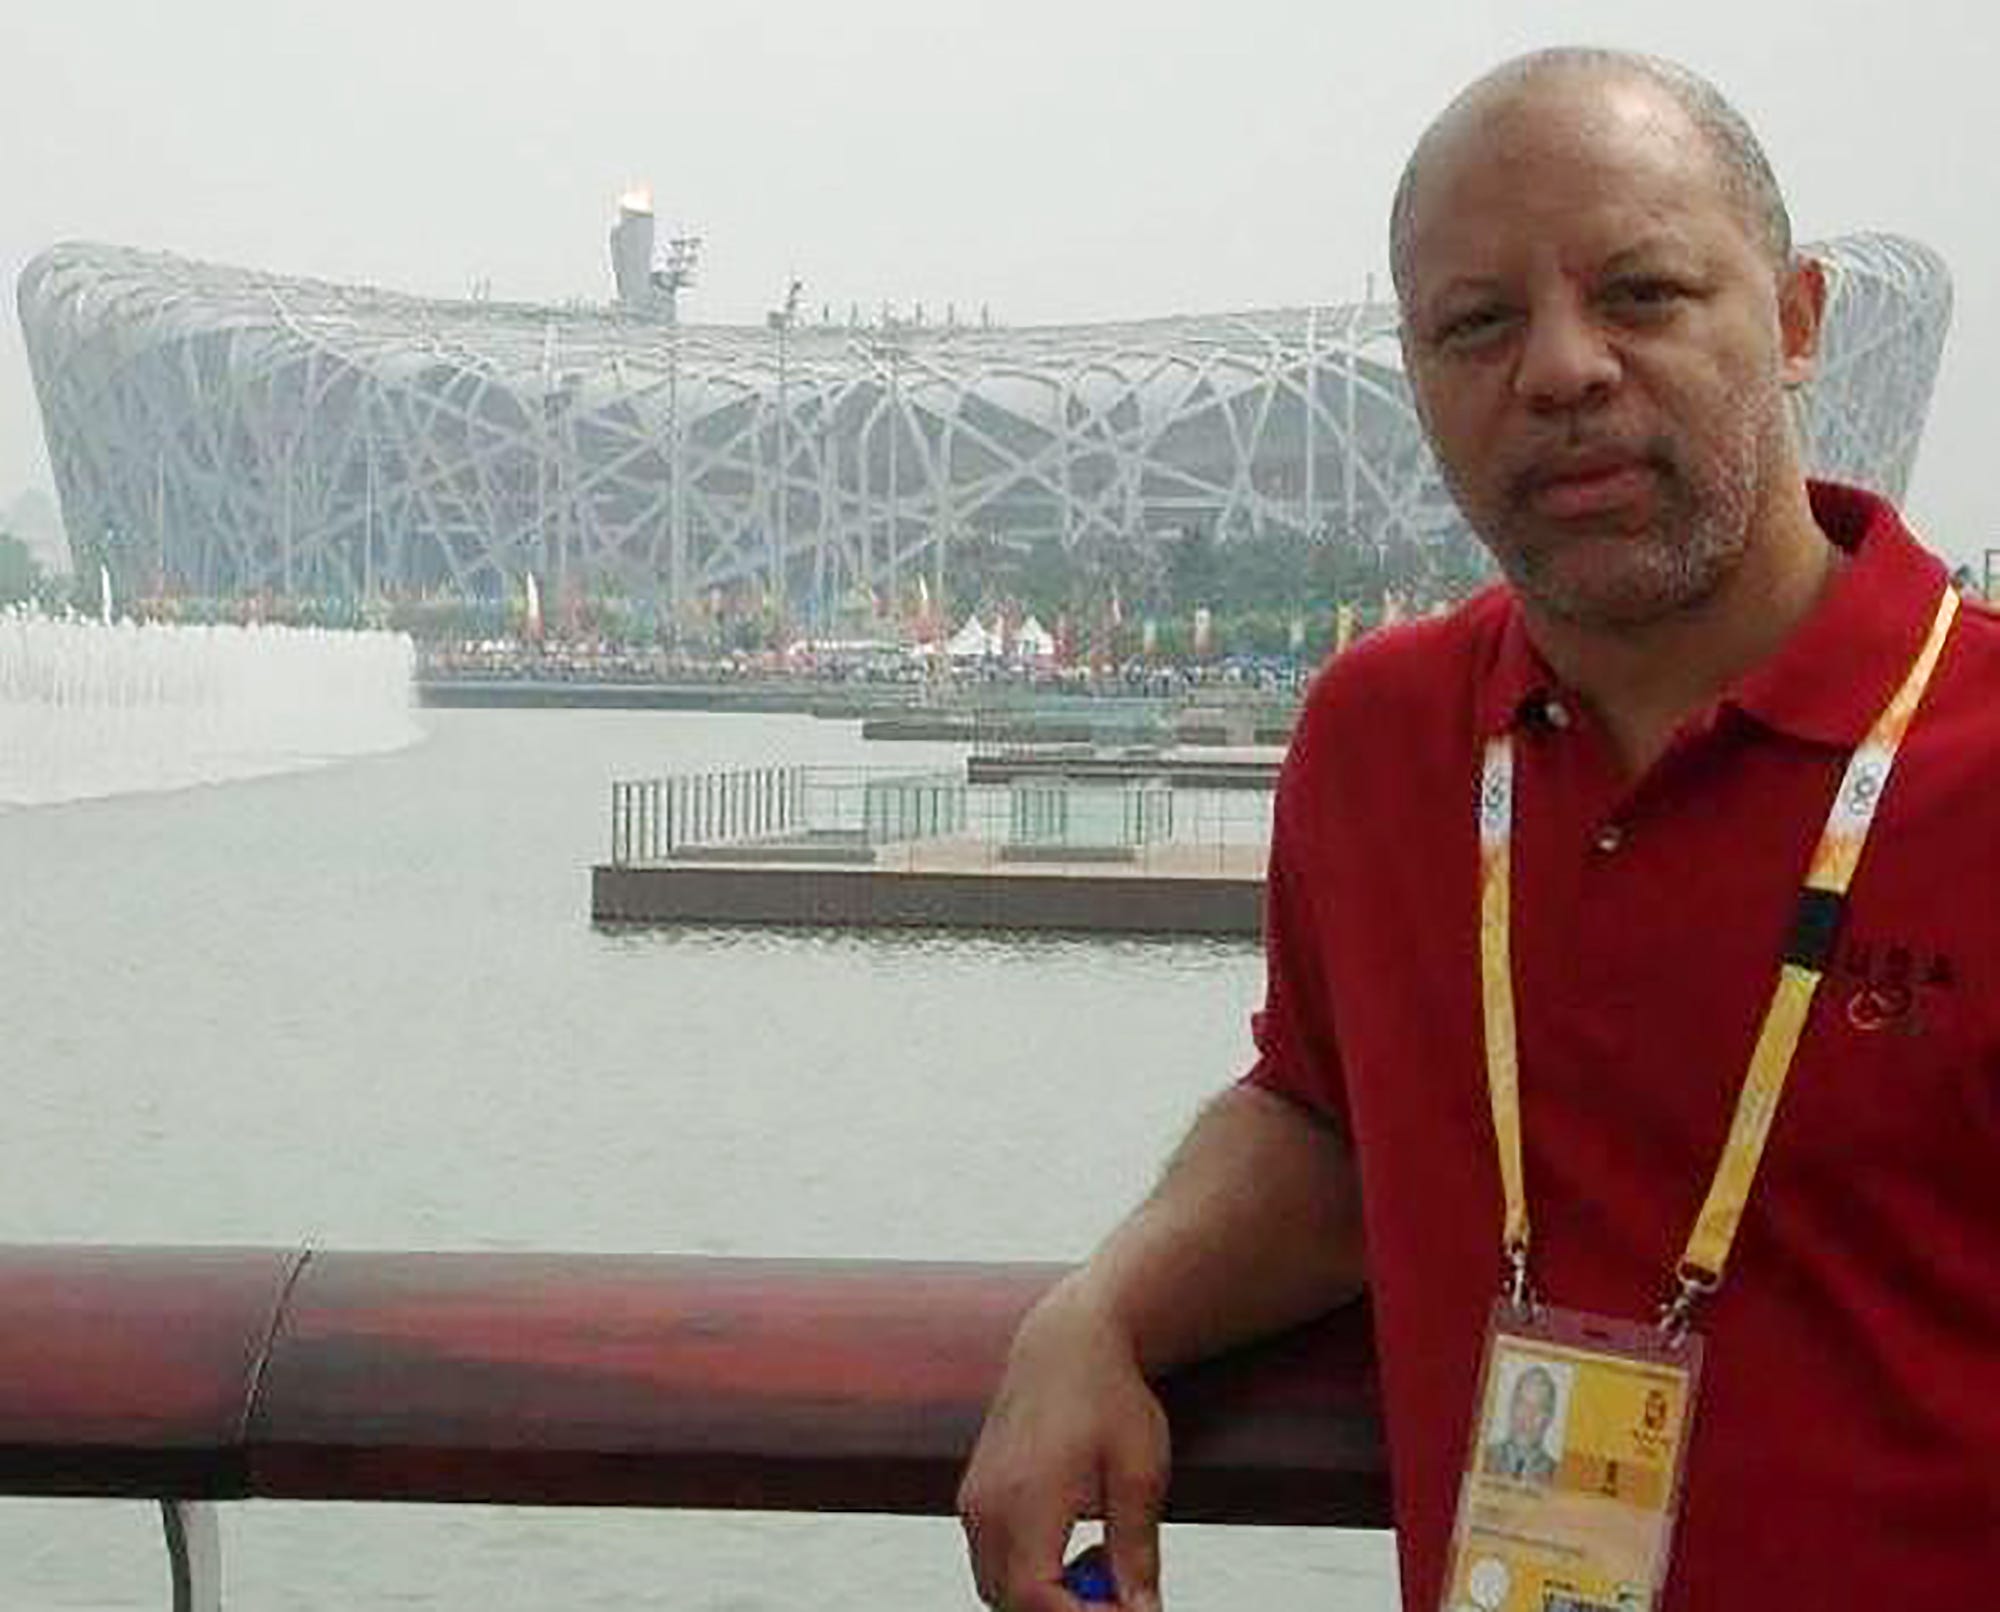 Leland Stein III's journalism journey has included covering four Summer Olympics, including the 2008 Beijing Olympics, where he posed with the National Stadium, also known as the Bird's Nest, in the backdrop.